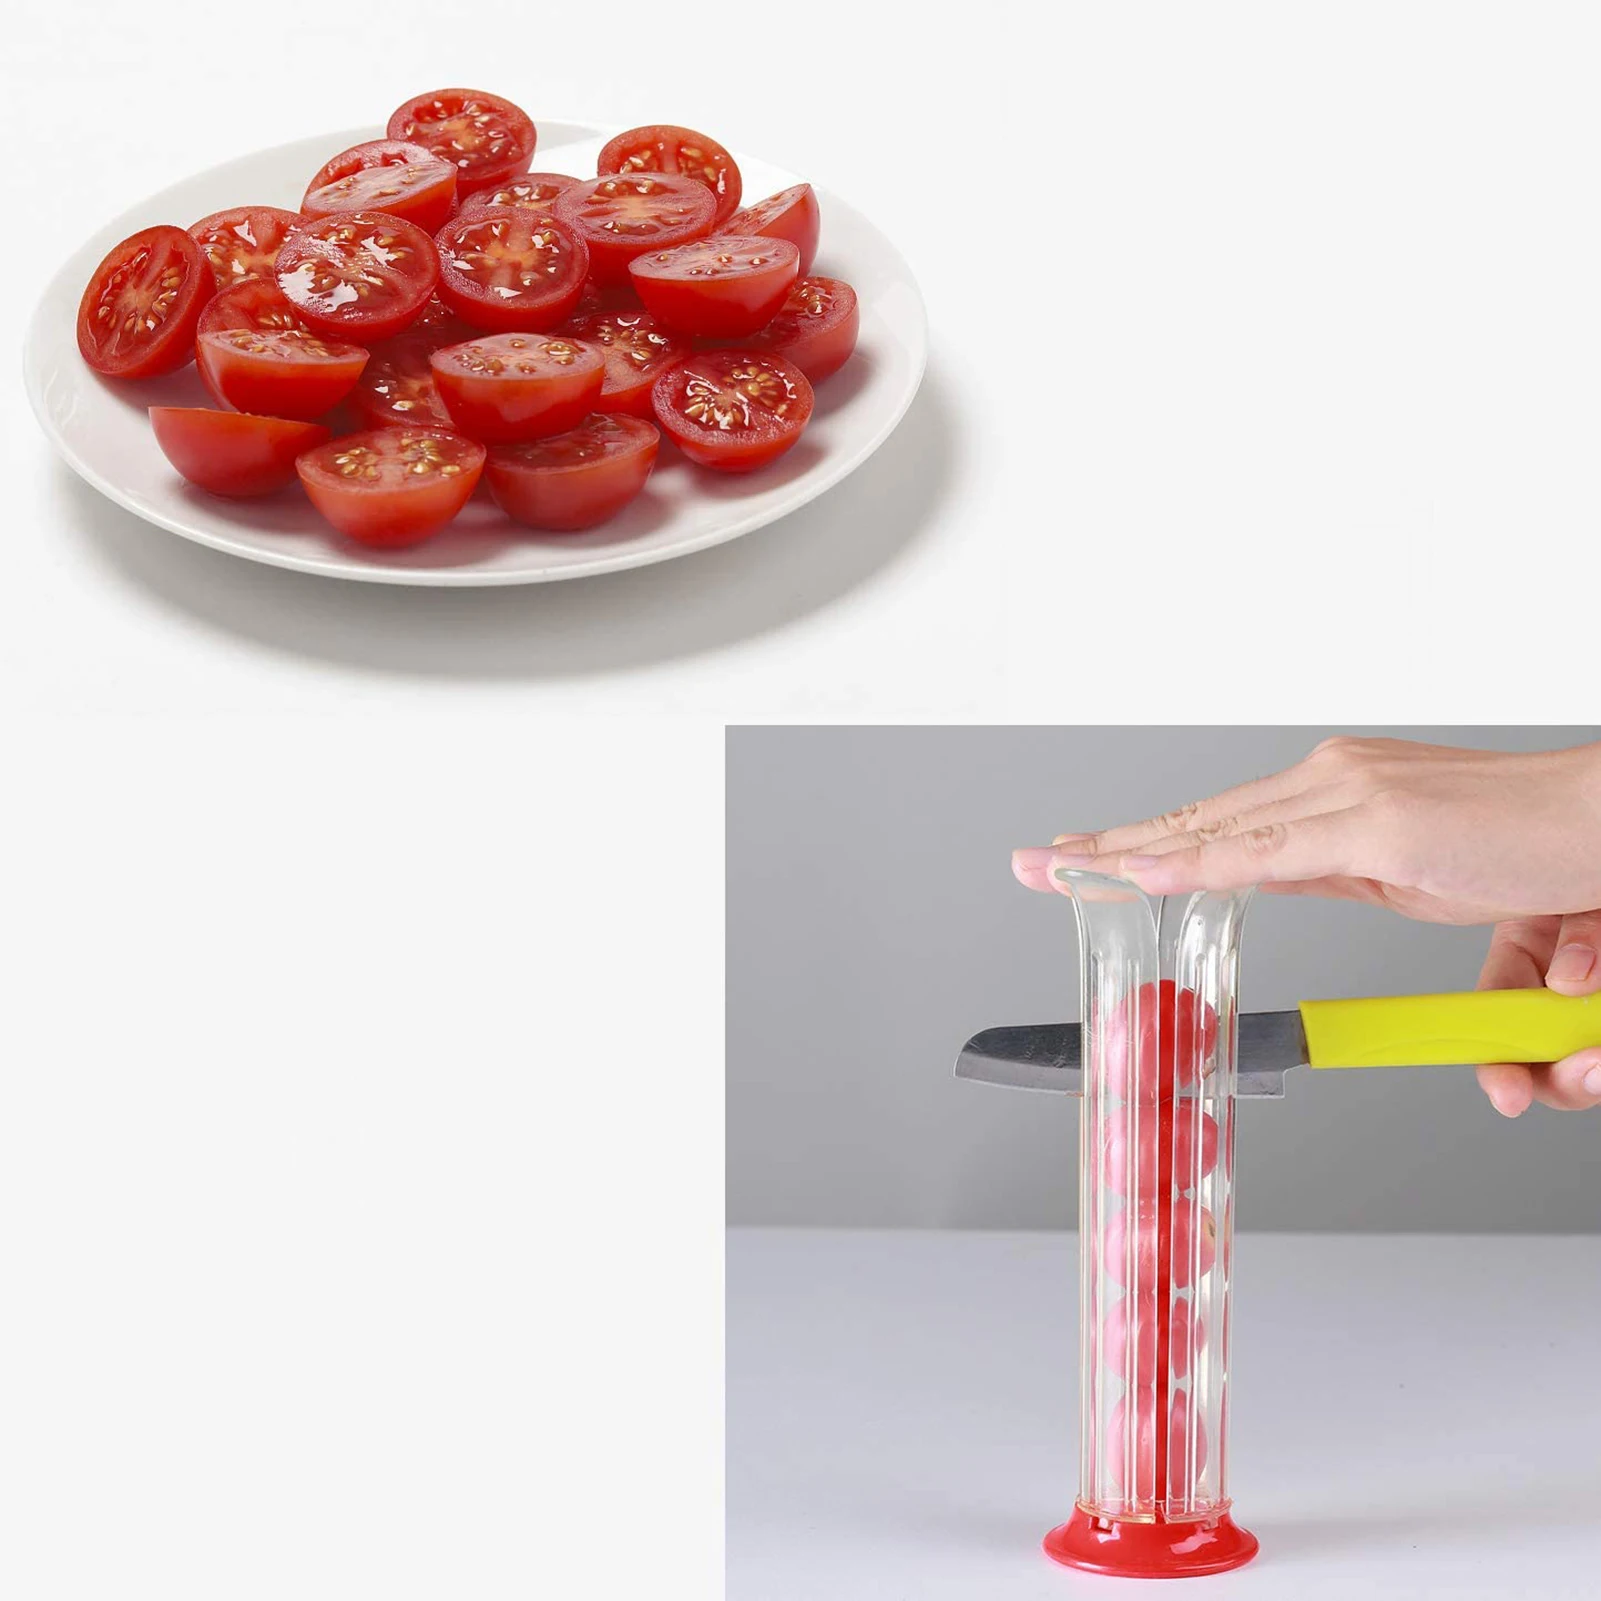 

Grape strawberry slicer Cutter small tomato strawberry Cutter kitchen household Fruits vegetables tool manual salad Safe Slicer